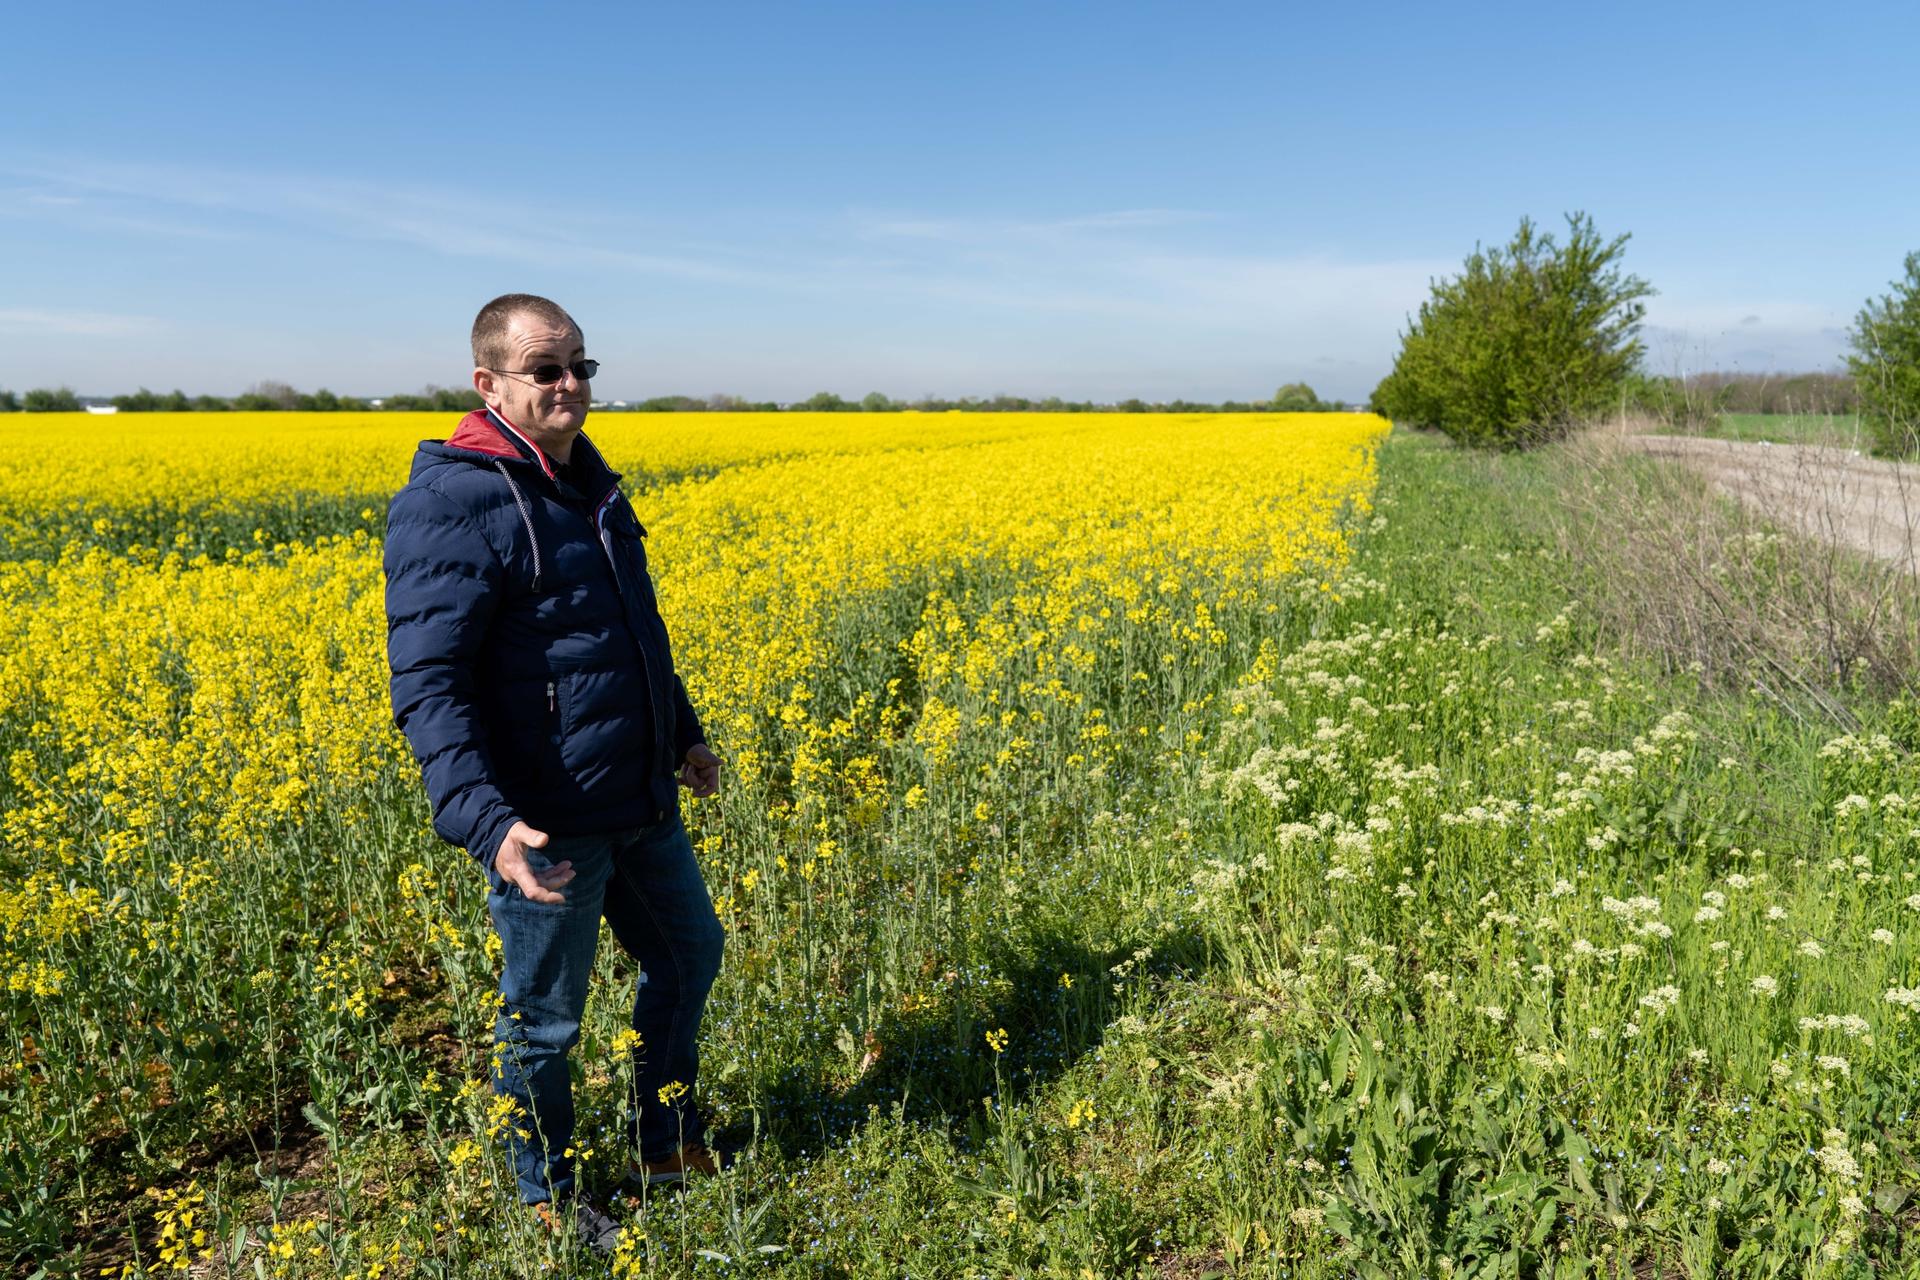 Romanian farmer Ionuț Spiță, 44, is hoping for a bumper harvest for his rapeseed crop this year.  